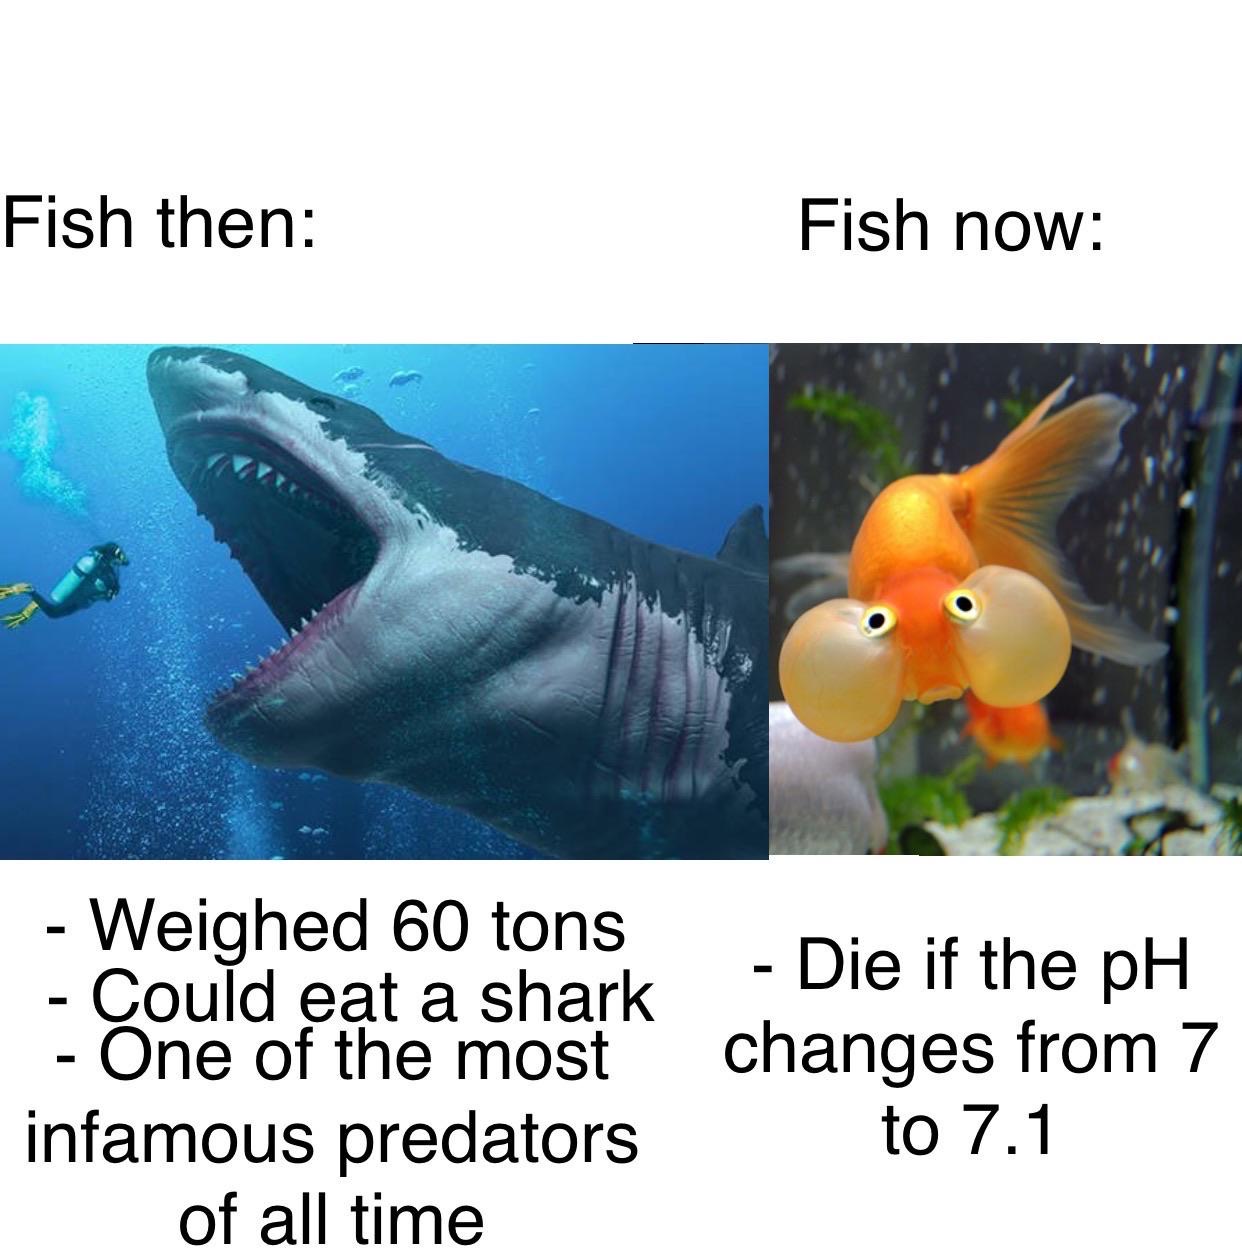 fish then fish now - Fish then Fish now Weighed 60 tons Could eat a shark One of the most infamous predators of all time Din if thank Die if the pH changes from 7 to 7.1